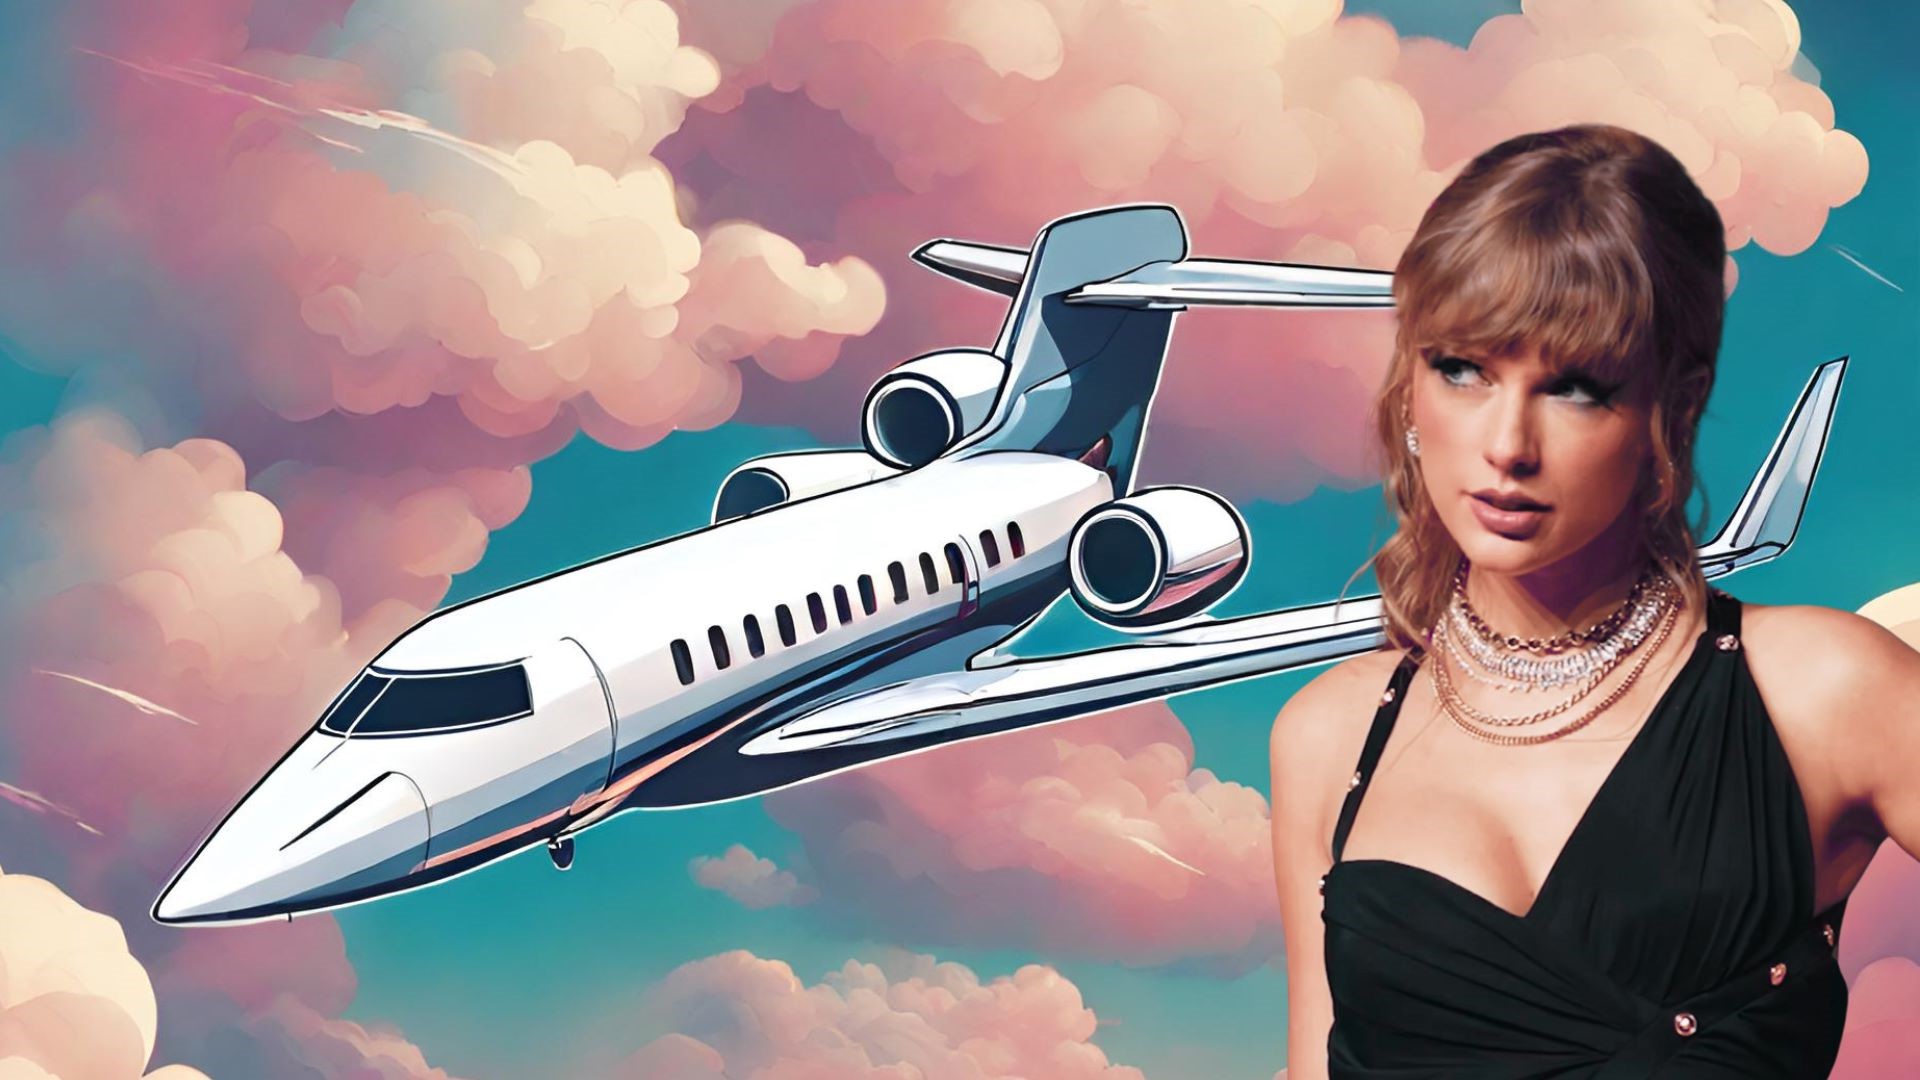 Taylor Swift’s Legal Battle Over Flight Tracking